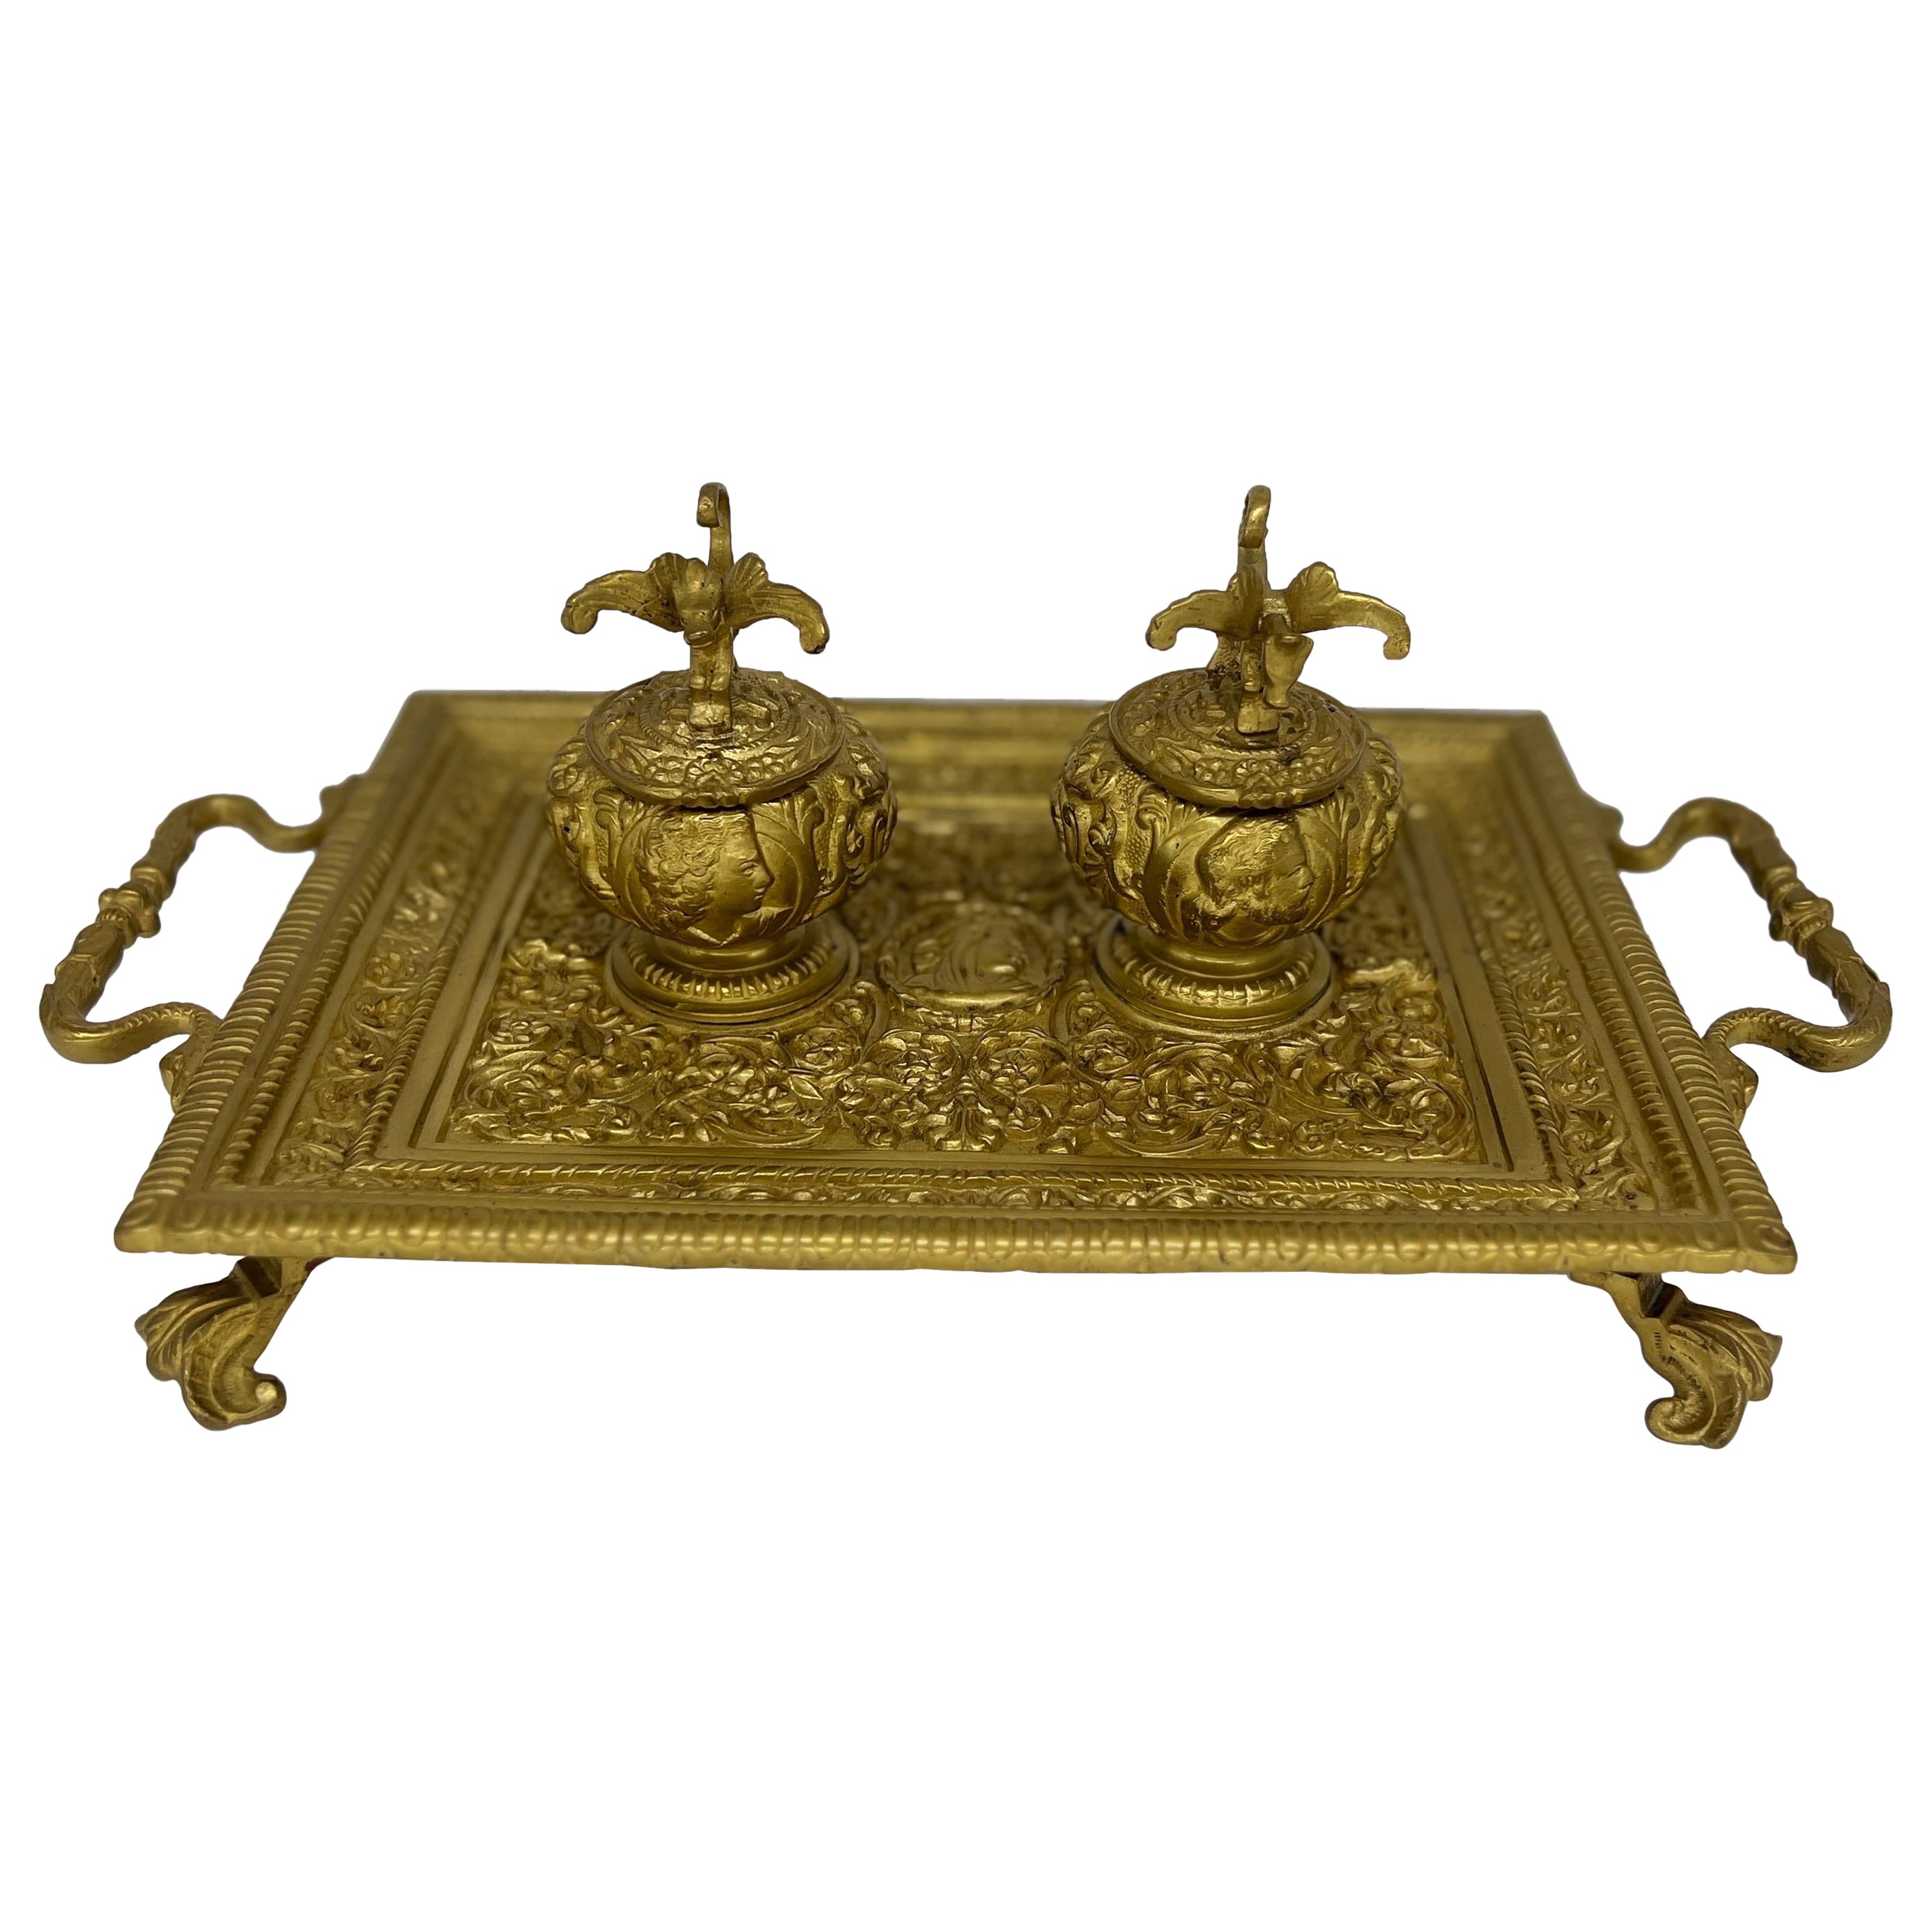 Emancipation Proclamation Inkstand - 19th Century Heavily Chased Brass